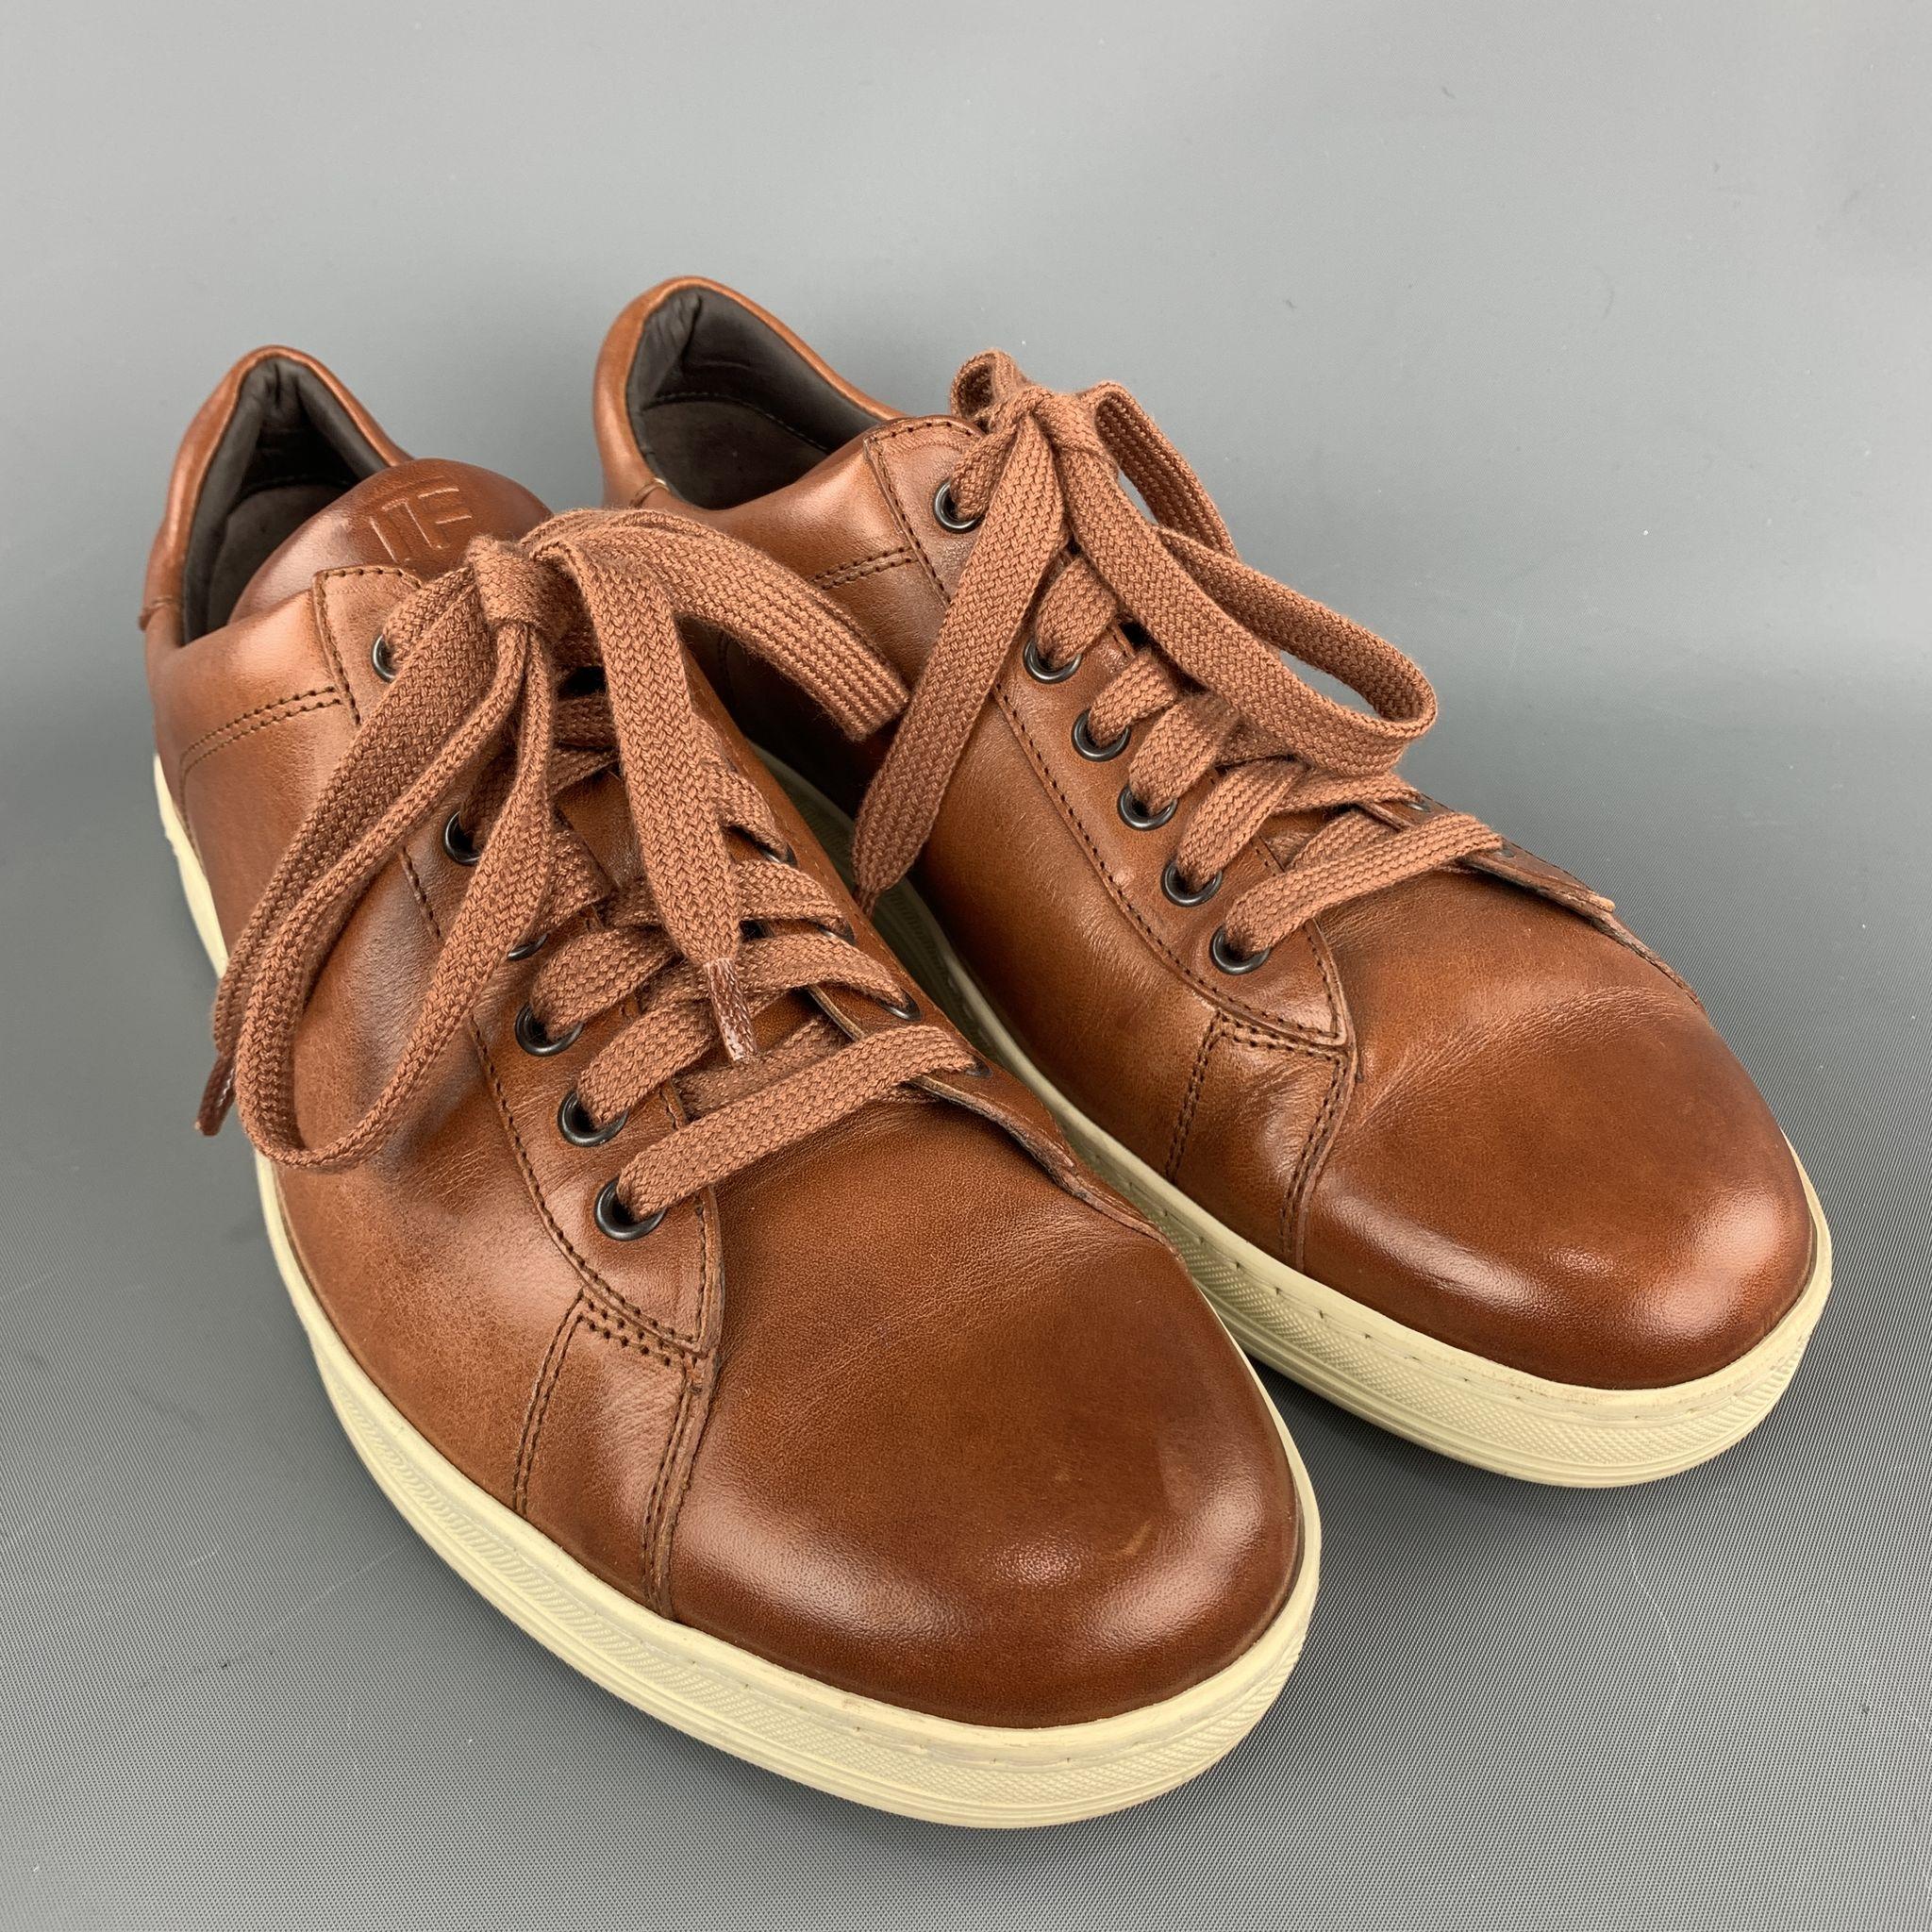 TOM FORD sneakers comes in a tan leather featuring a lace up style and a rubber sole. Made in Italy.

Excellent Pre-Owned Condition.
Marked: 11

Outsole: 4 in. x 12 in. 